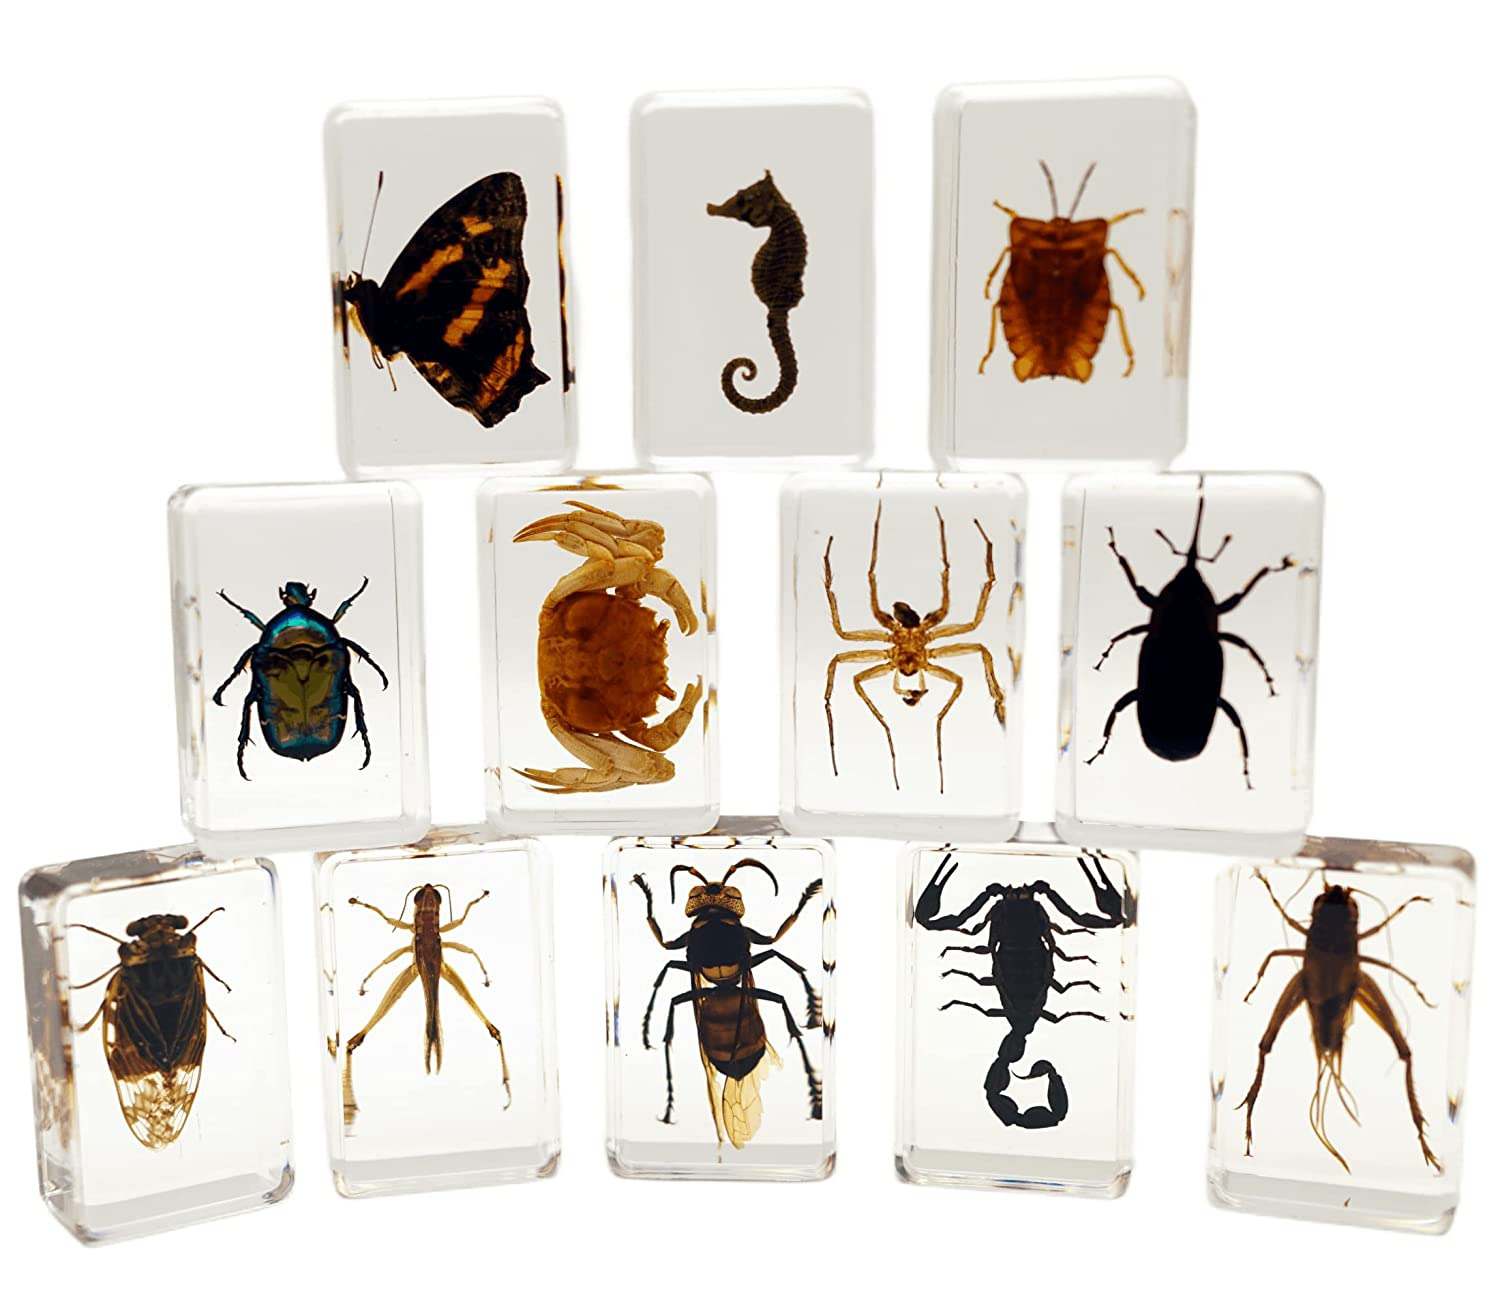 12 Pcs High-Definition Amber, Insect in Resin Bugs Specimen Set Preserved in Res